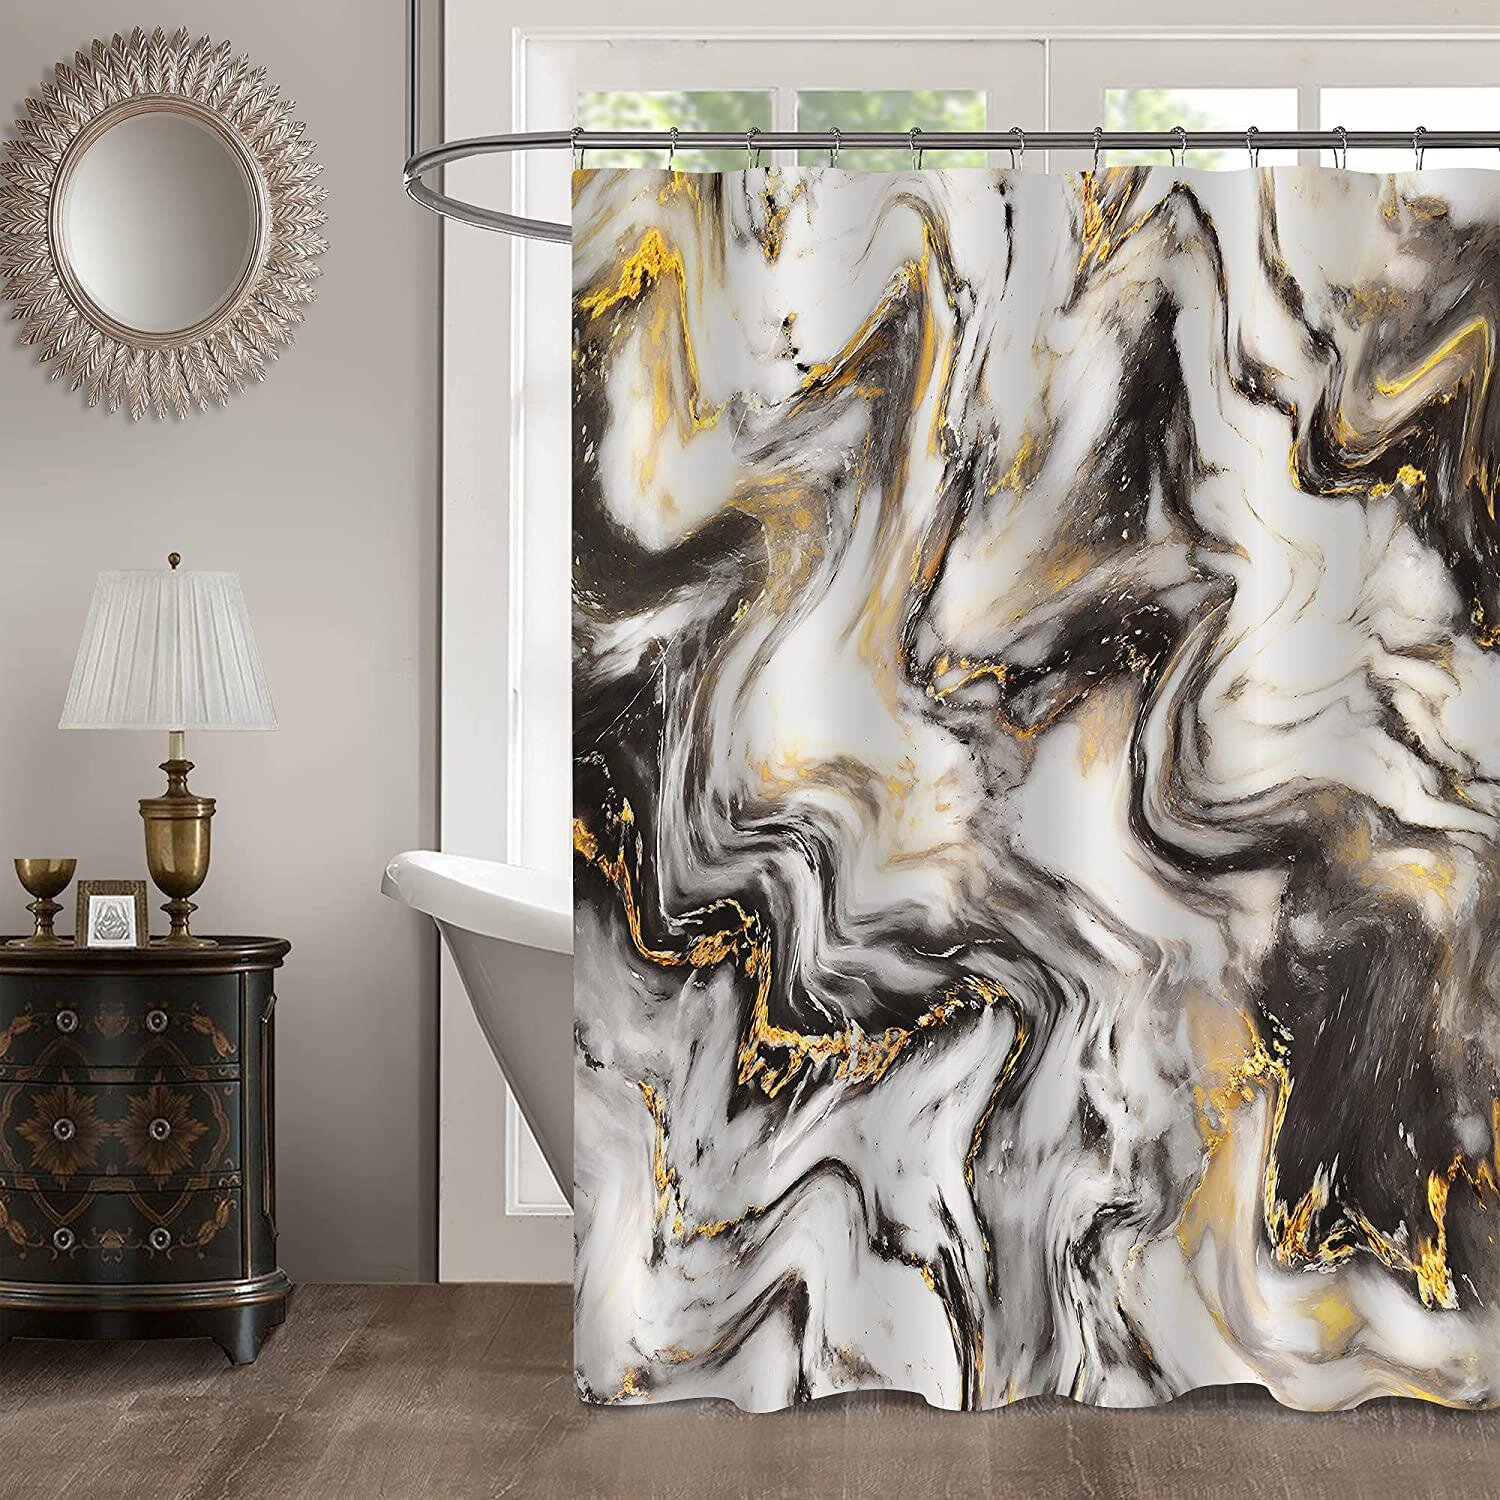 Gibelle Small Stall Shower Curtain 36 x 72 Modern Luxury Art Waterproof Fabric Shower Curtain for Bathroom Decor Half Narrow Abstract Black Gold Marble Shower Curtain